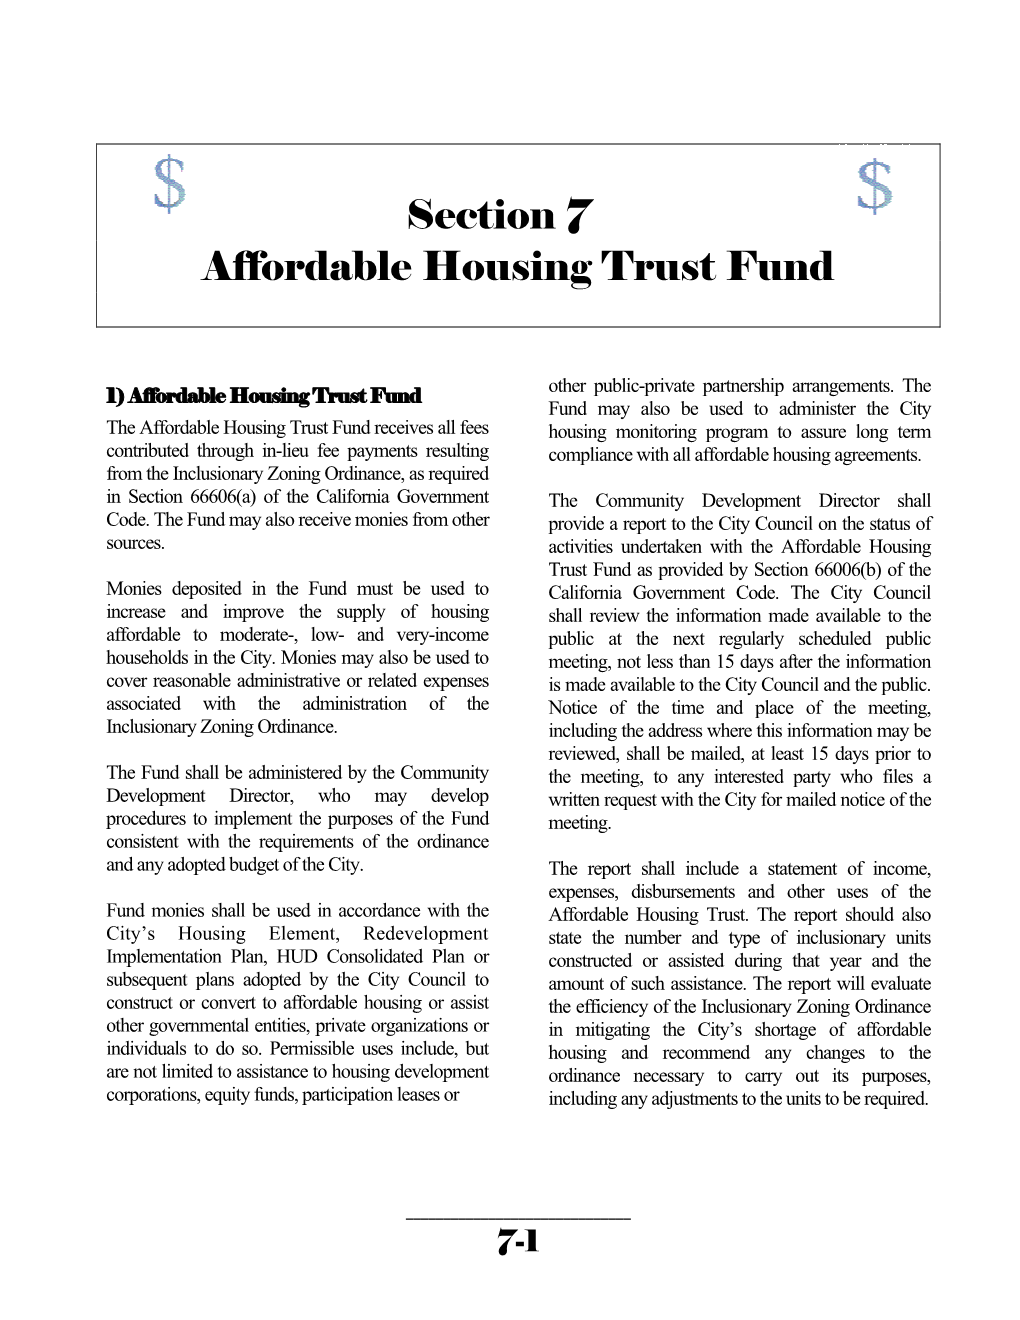 Section 7 Affordable Housing Trust Fund